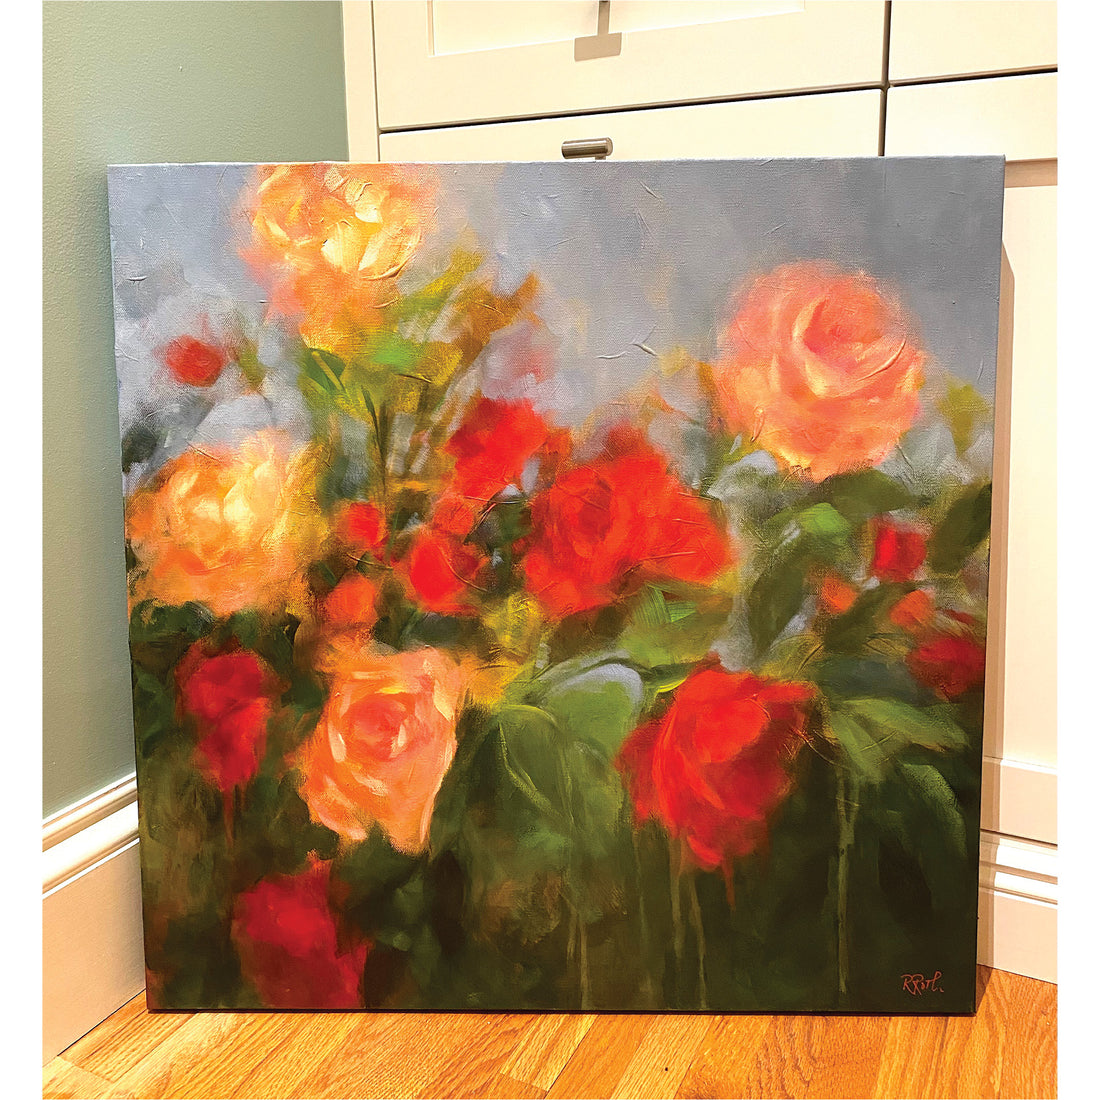 Raquel Roth "Forever Roses" floral abstract painting Canadian Art 